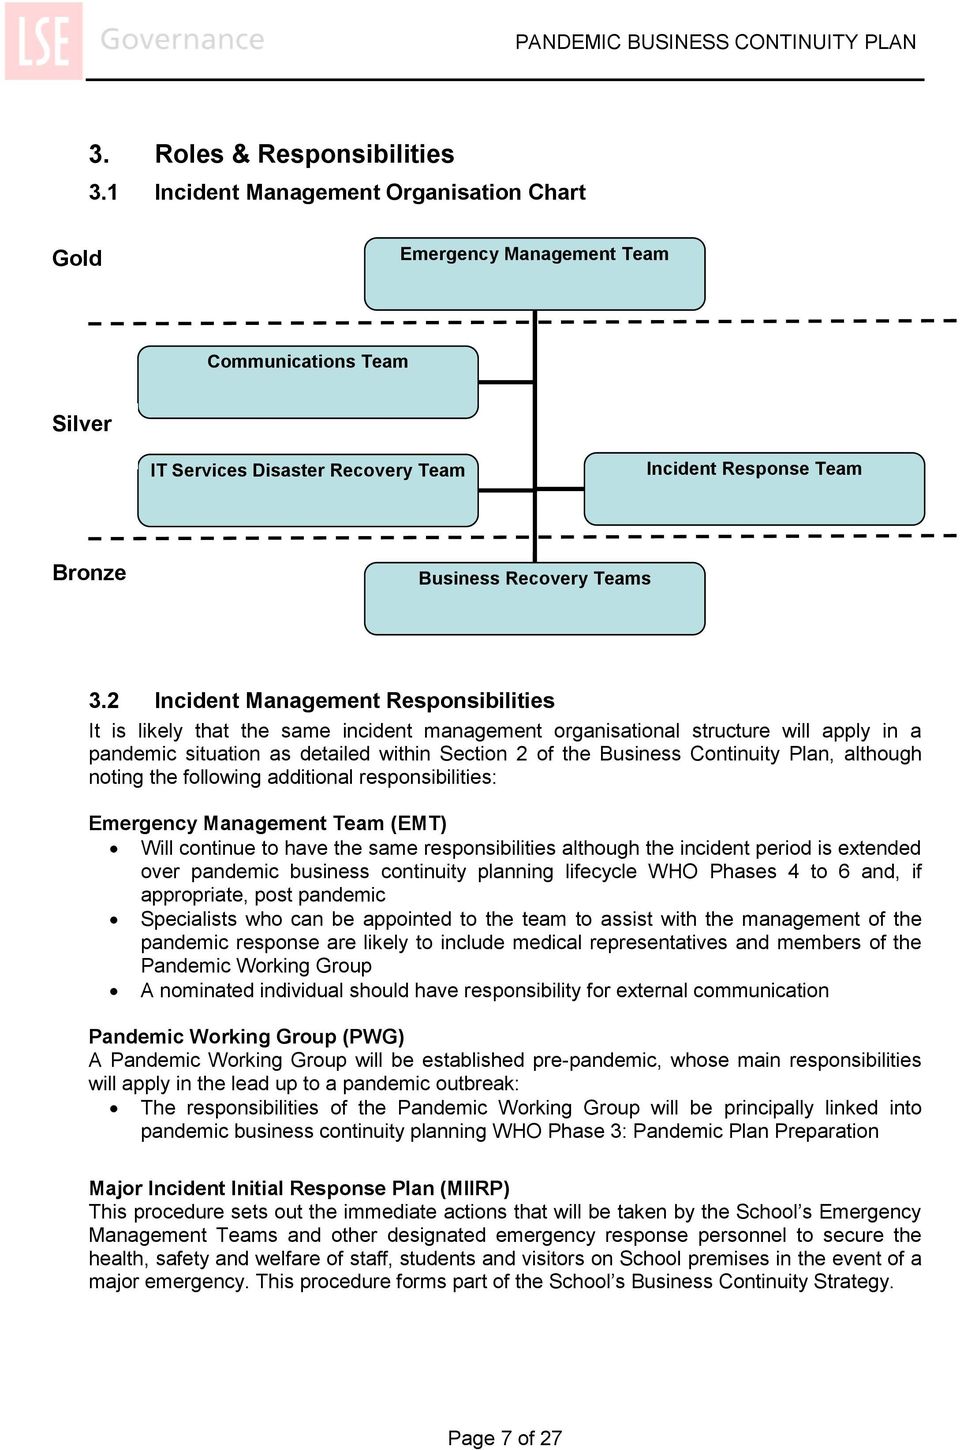 2 Incident Management Responsibilities It is likely that the same incident management organisational structure will apply in a pandemic situation as detailed within Section 2 of the Business